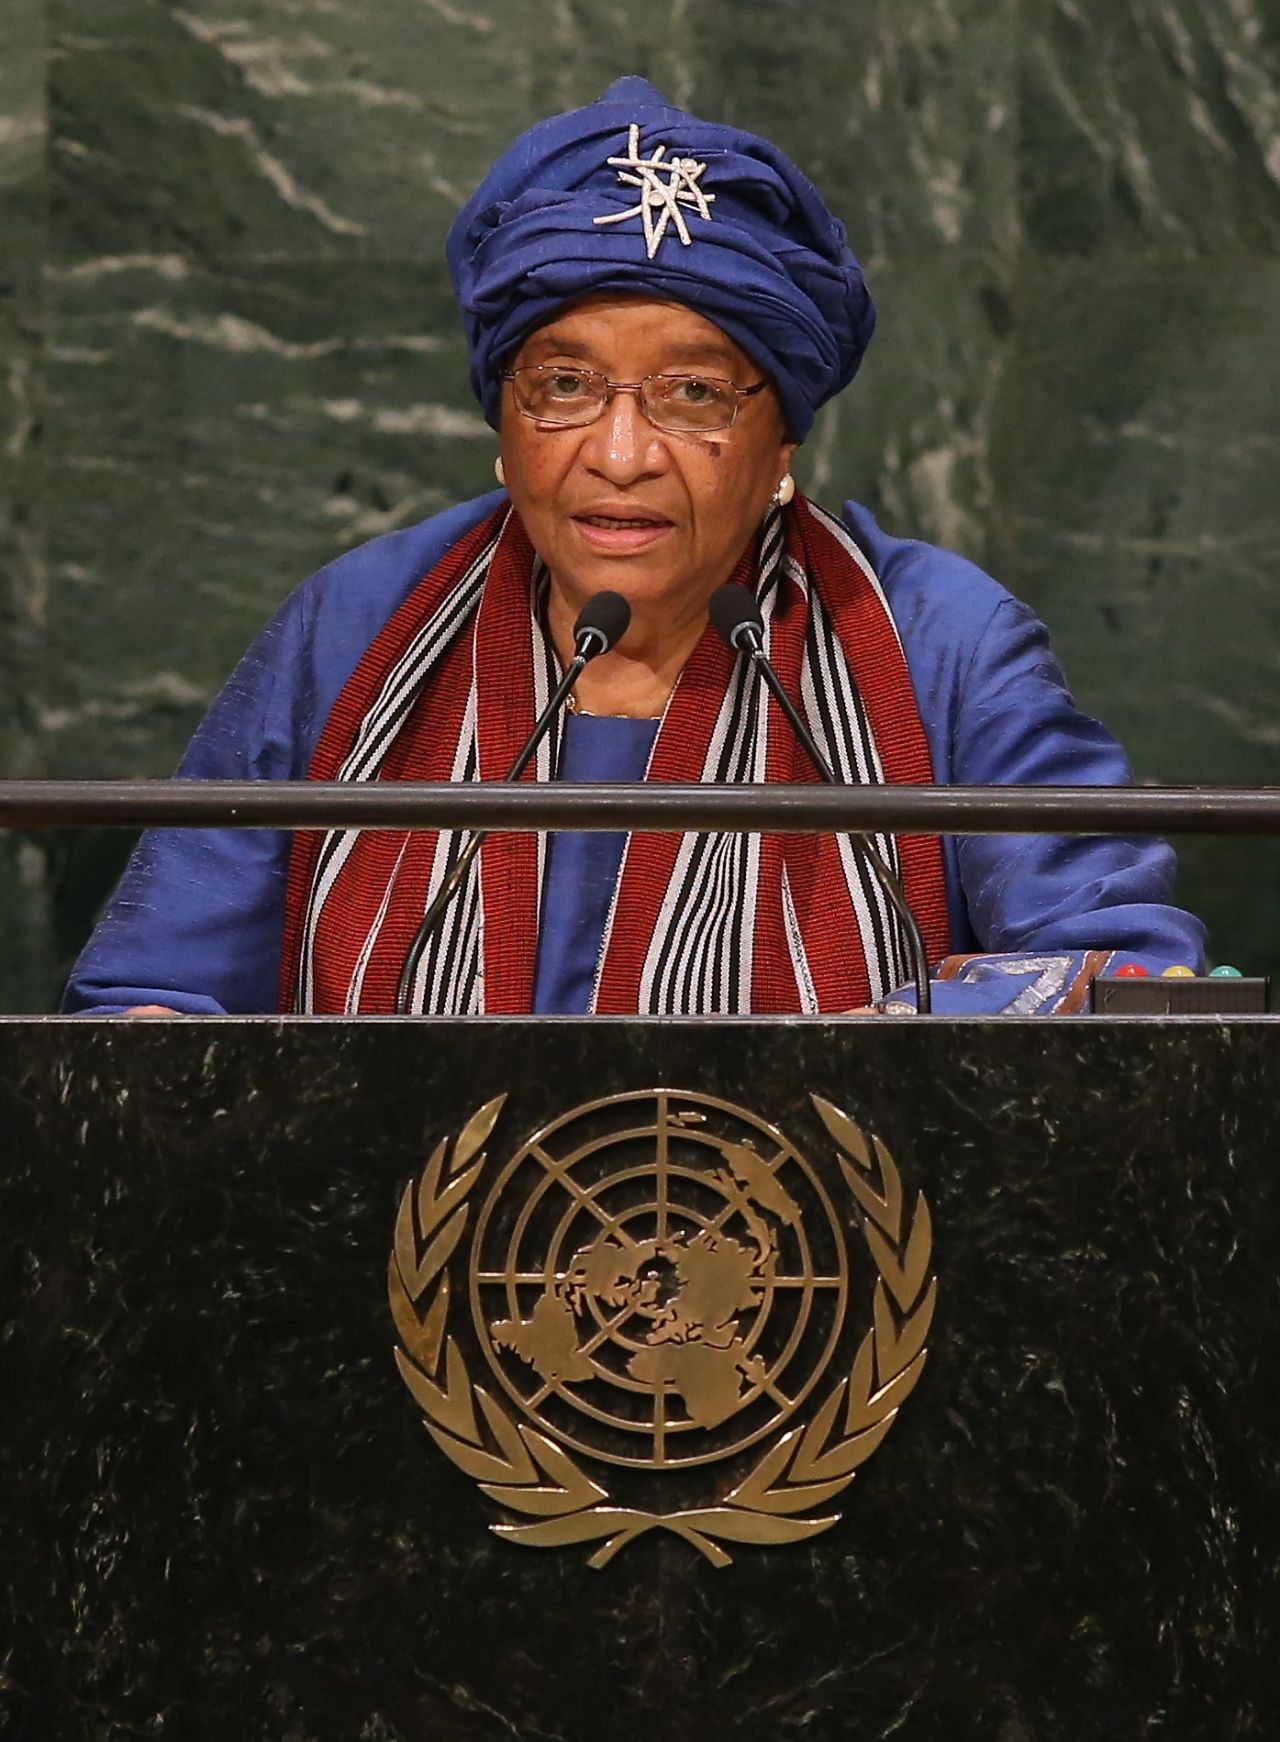 Ellen Johnson Sirleaf is the President of Liberia. She is the first elected female head of state in Africa.